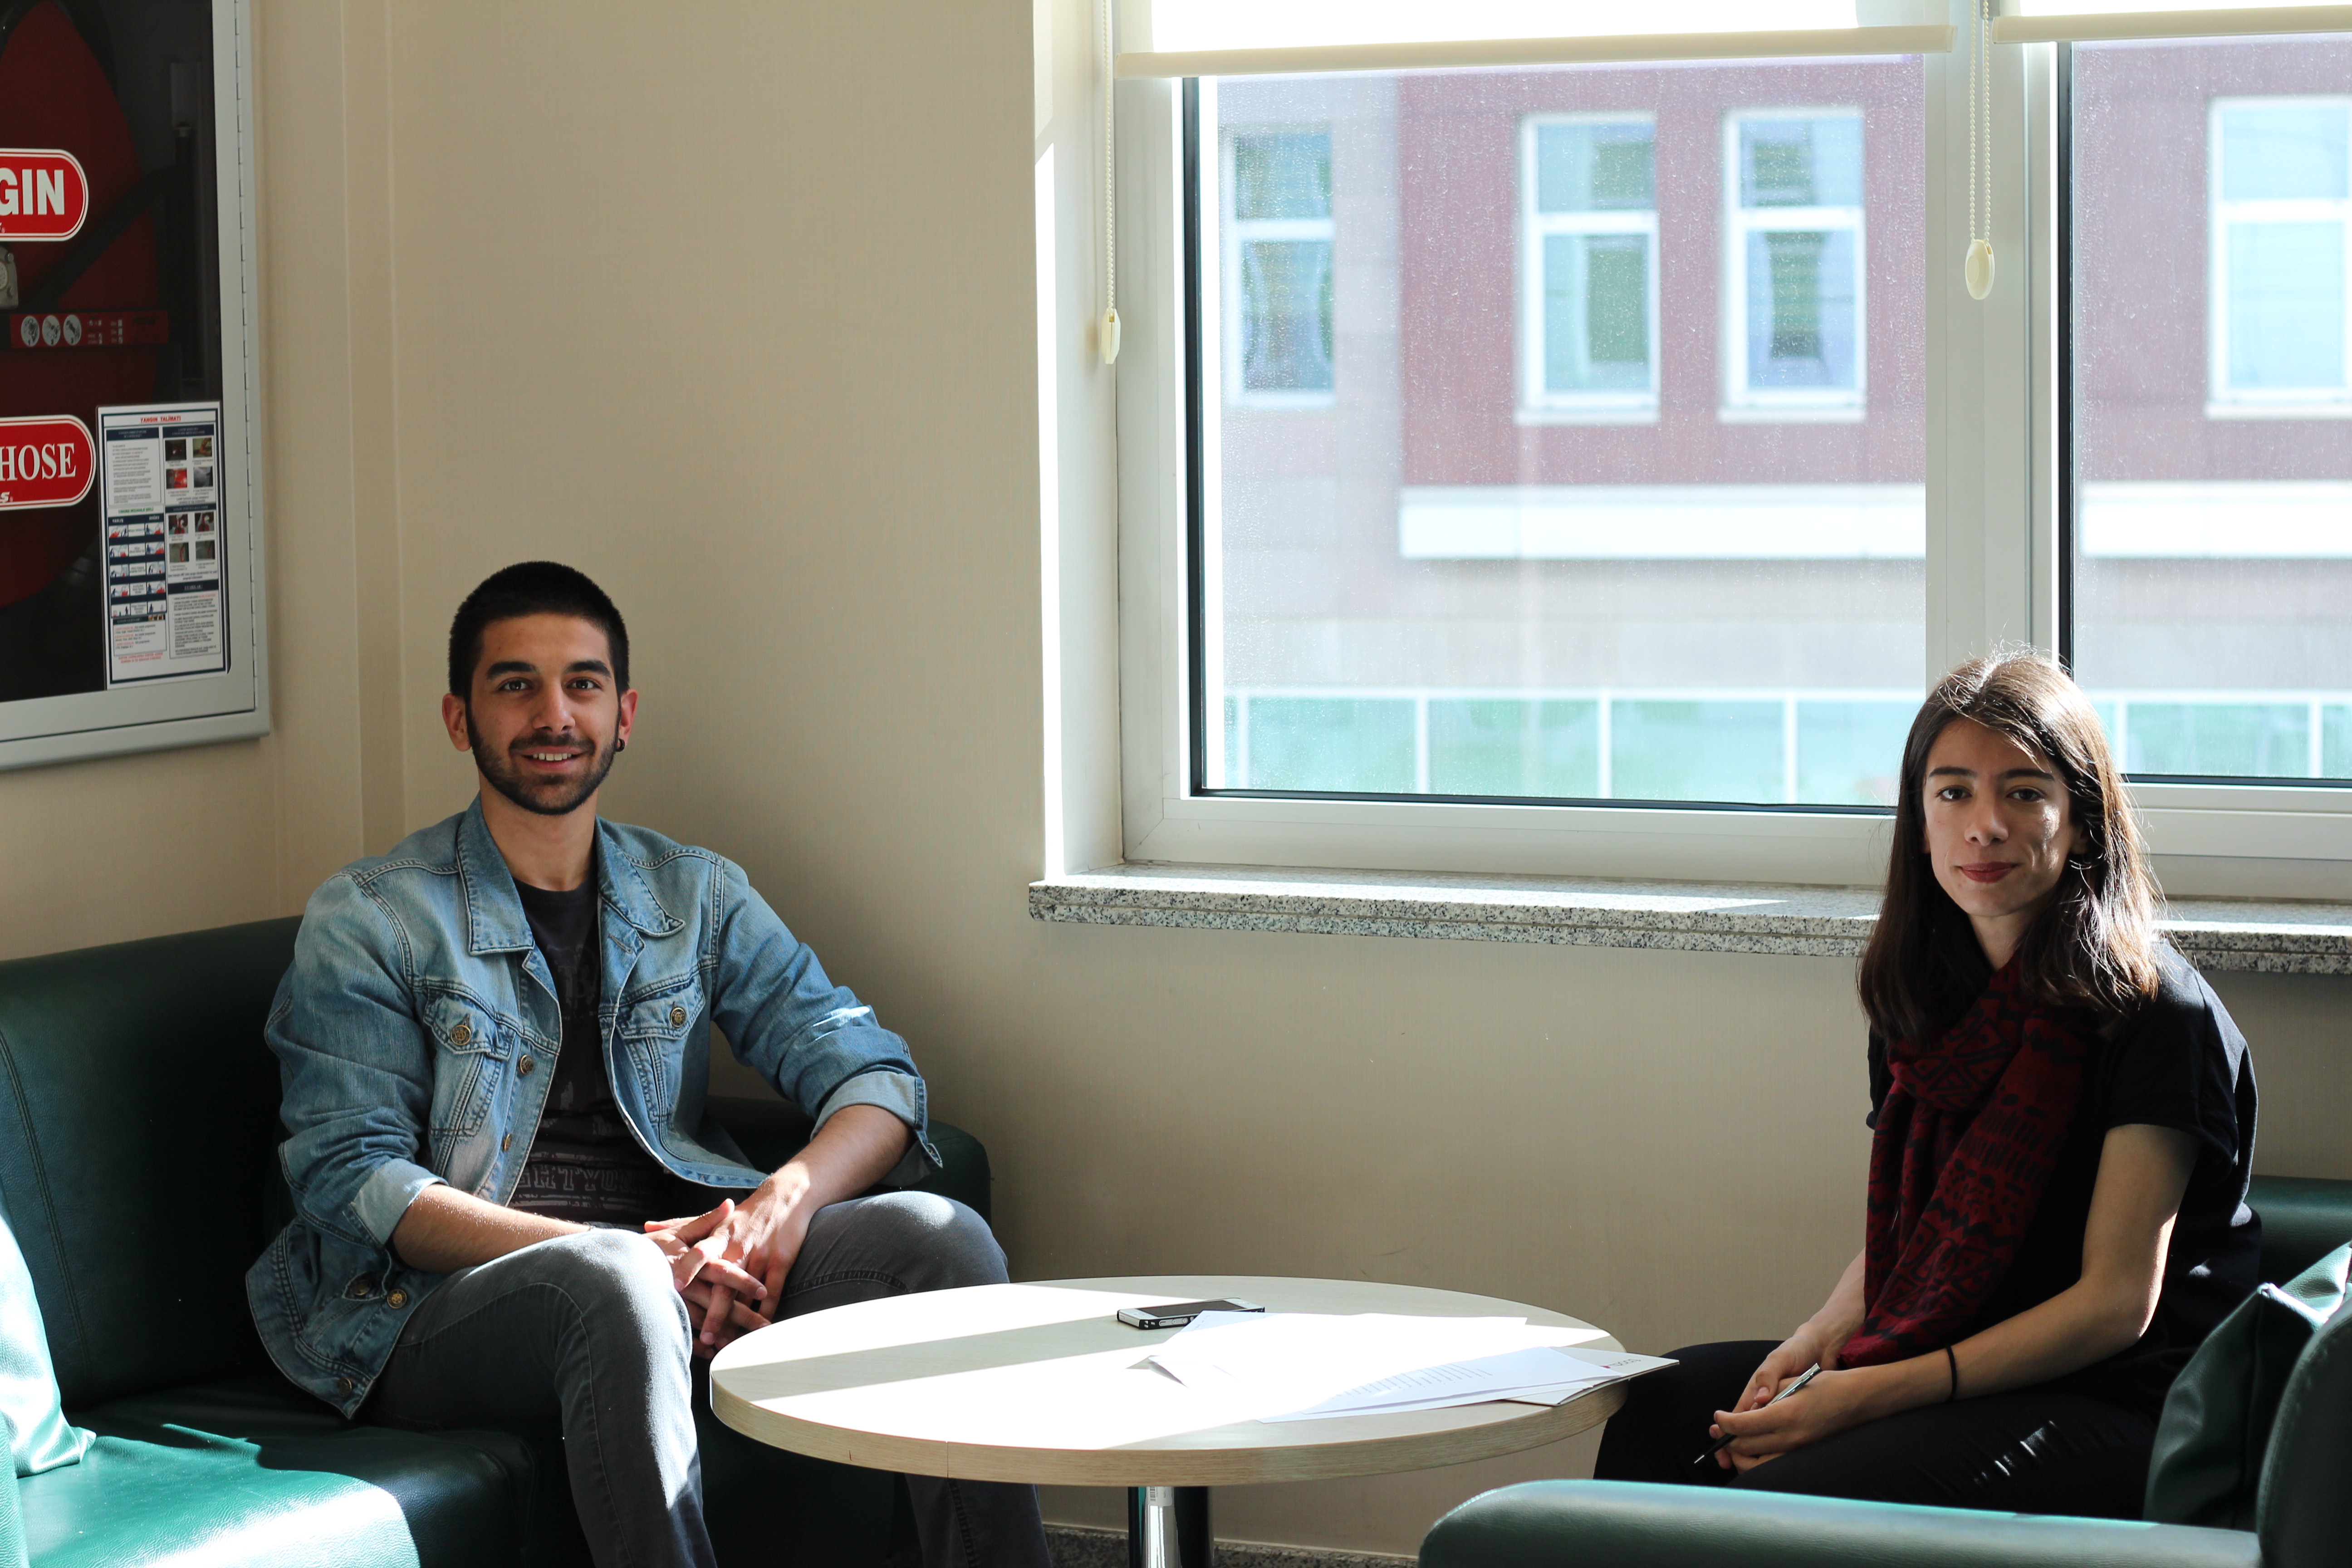 Gazette ETÜ Had An Interview With Ceyhun Yılmaz, Who Double Majors In Psychology While Attending The Faculty of Medicine